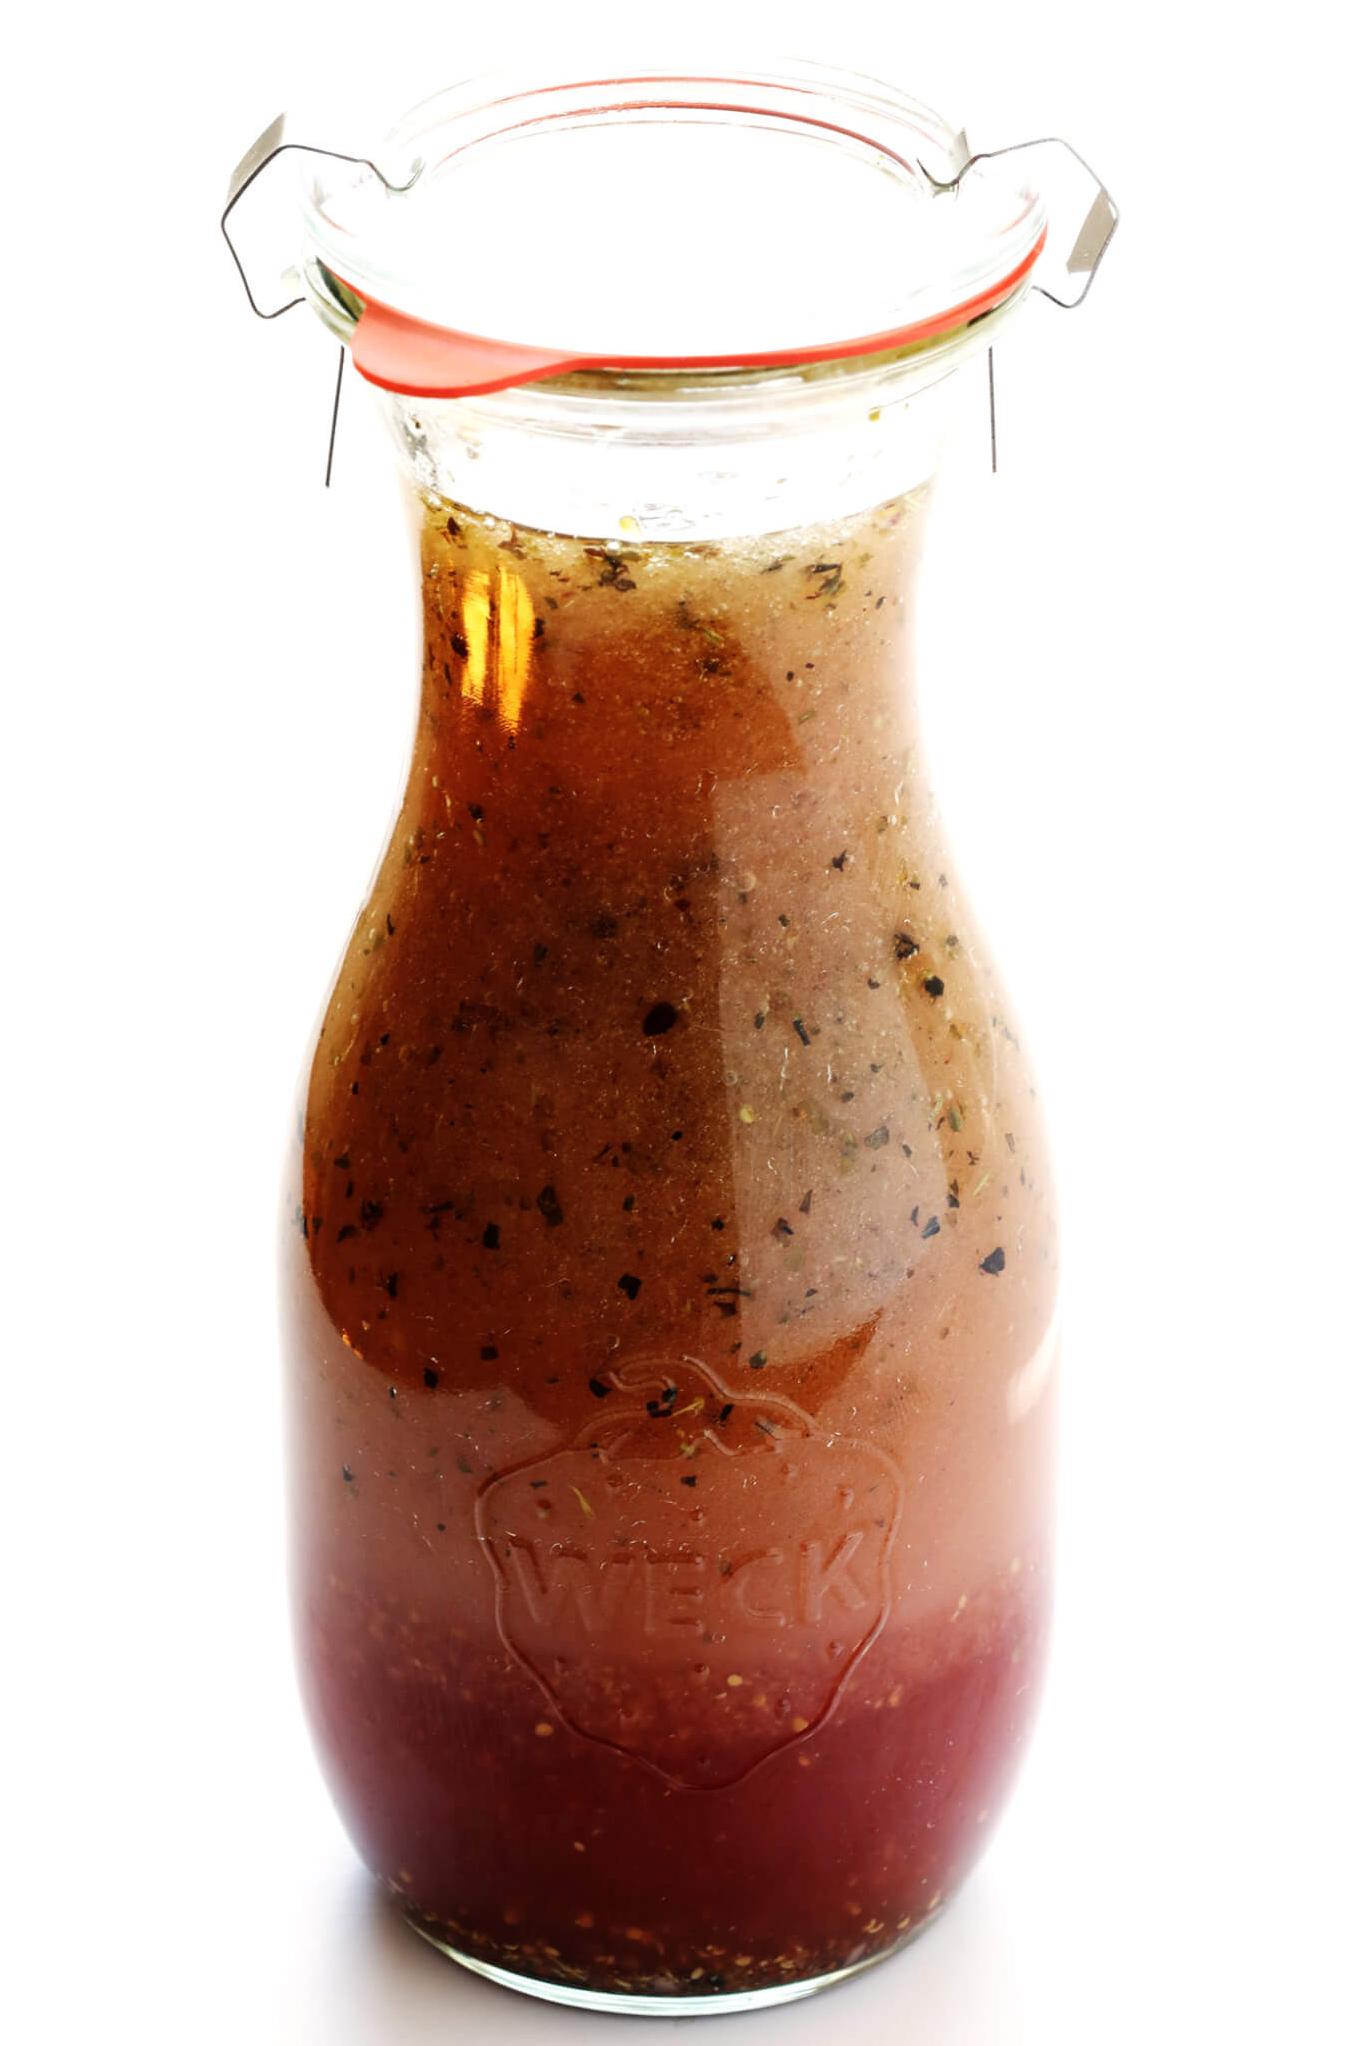  Your salad just got more enticing with this bold and tangy dressing.